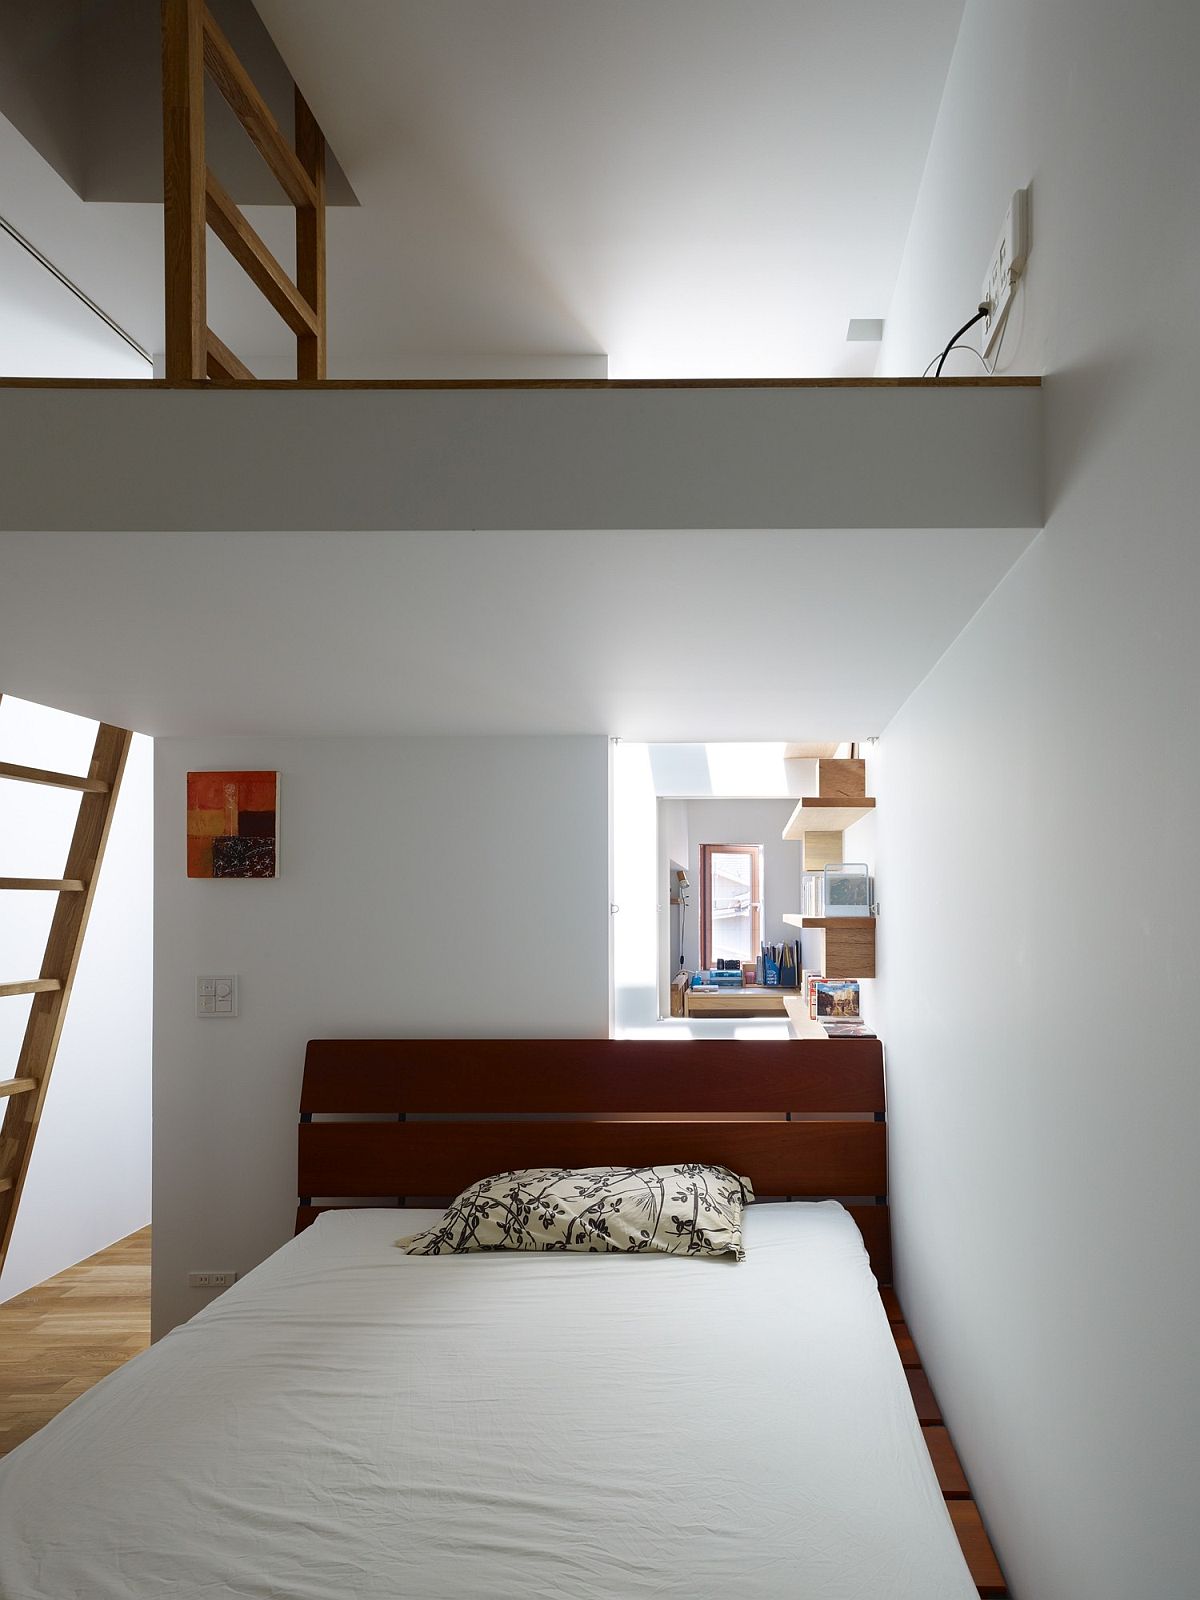 Loft-level-bedroom-of-the-house-with-multiple-sleeping-areas